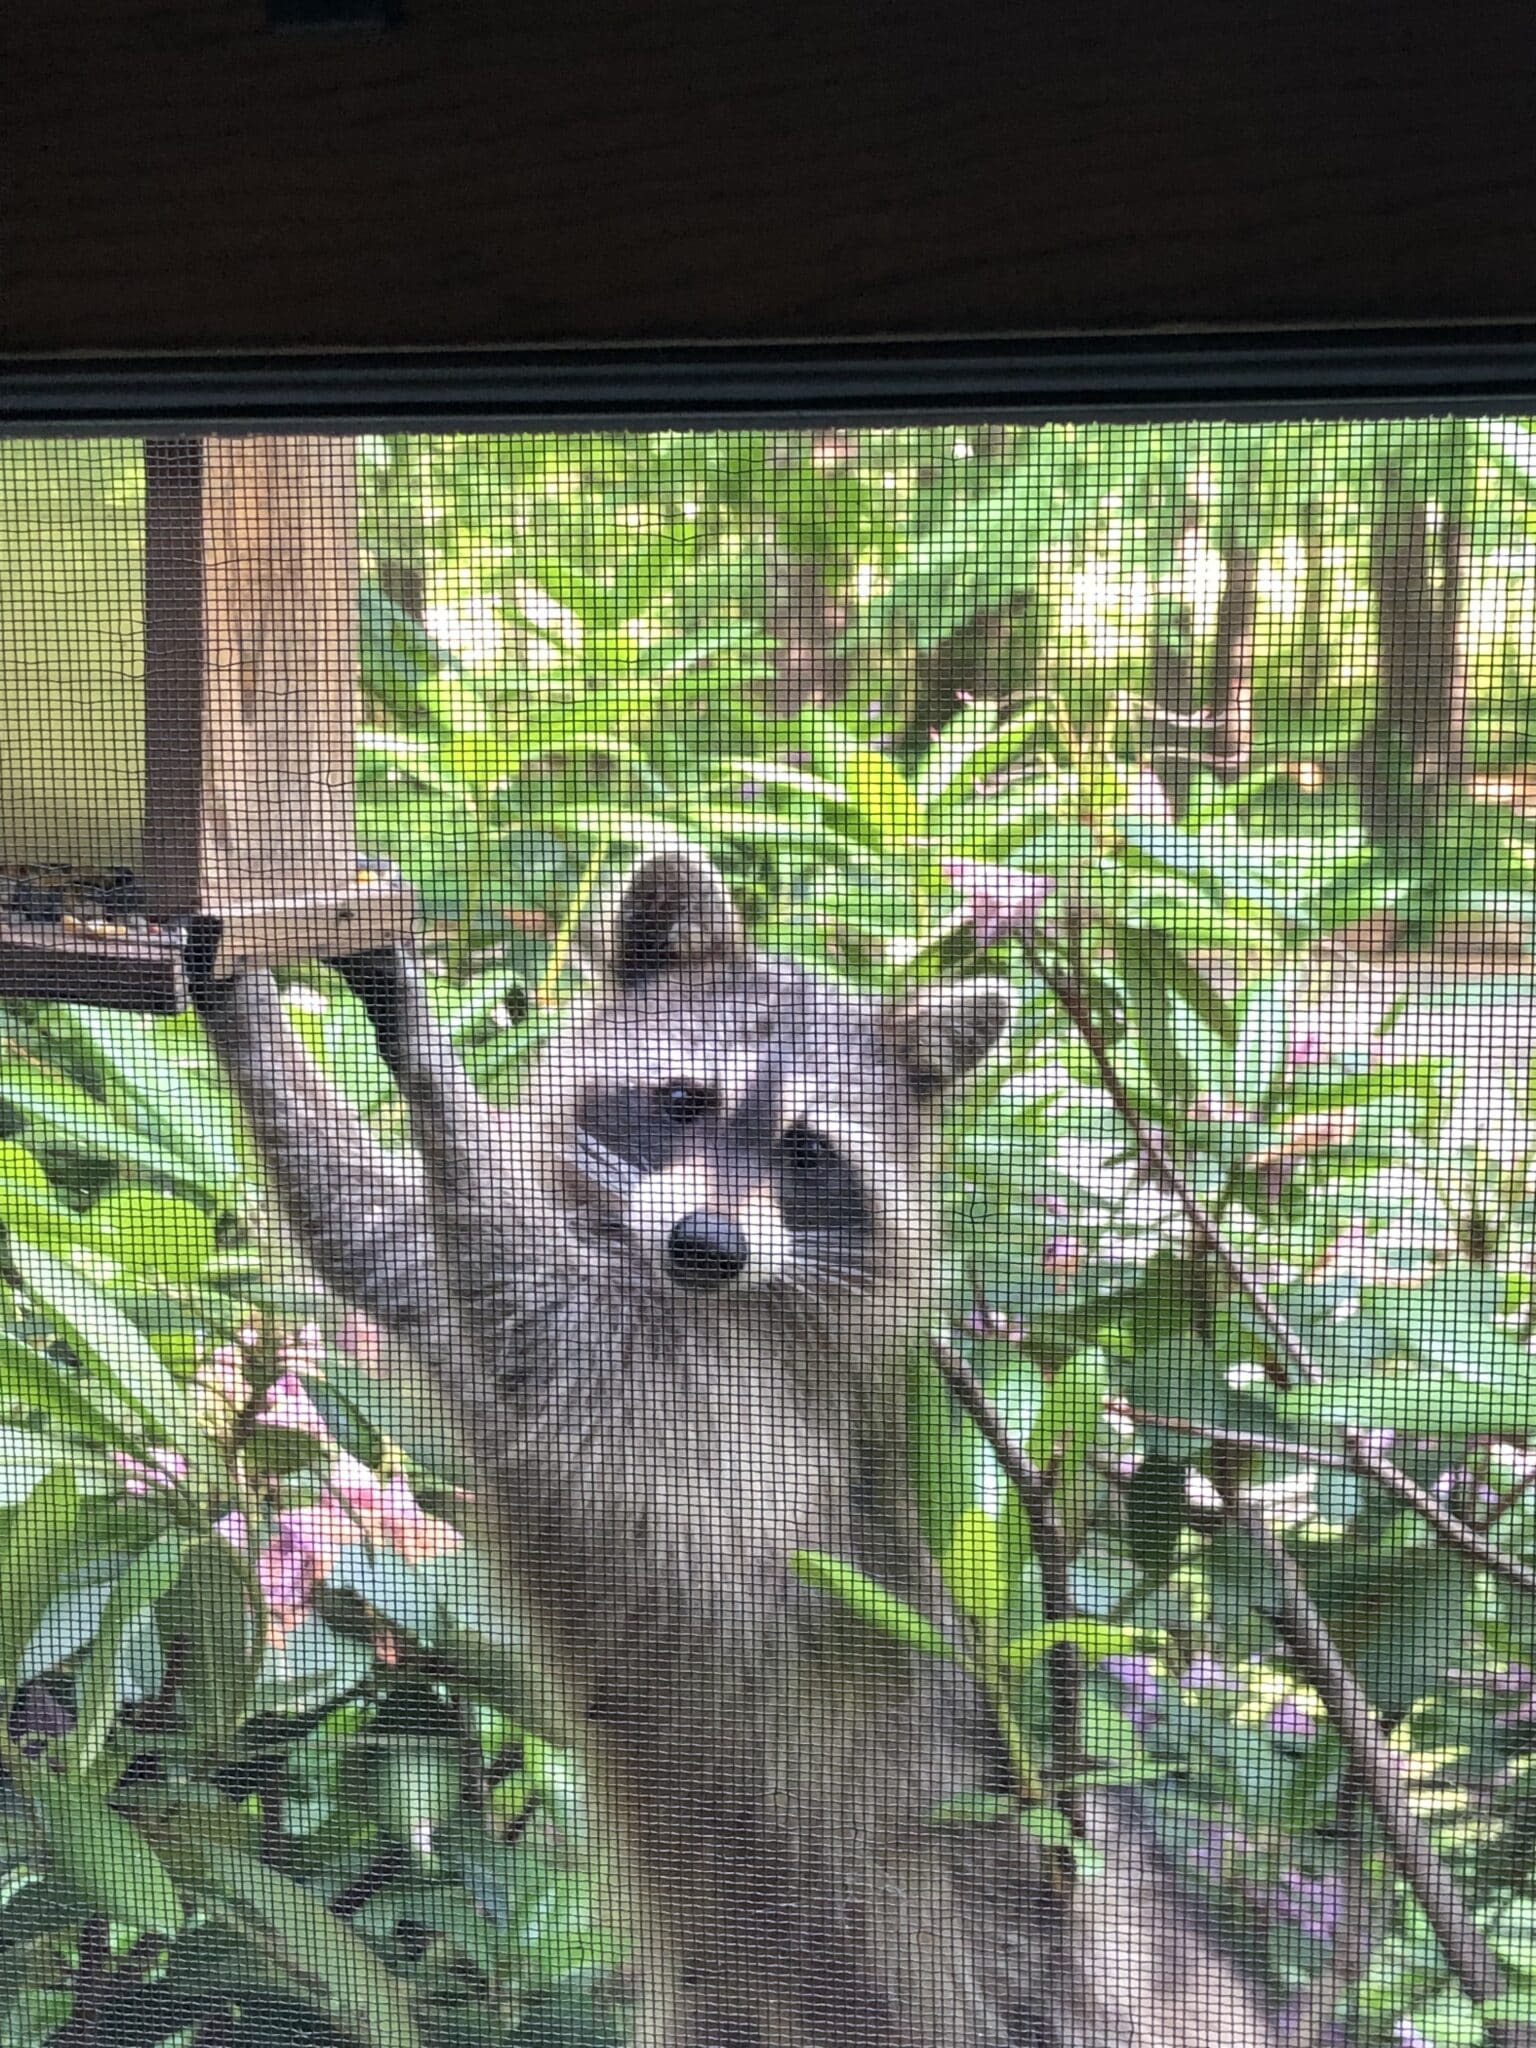 A young raccoon visiting the birdfeeder outside the dining room window.